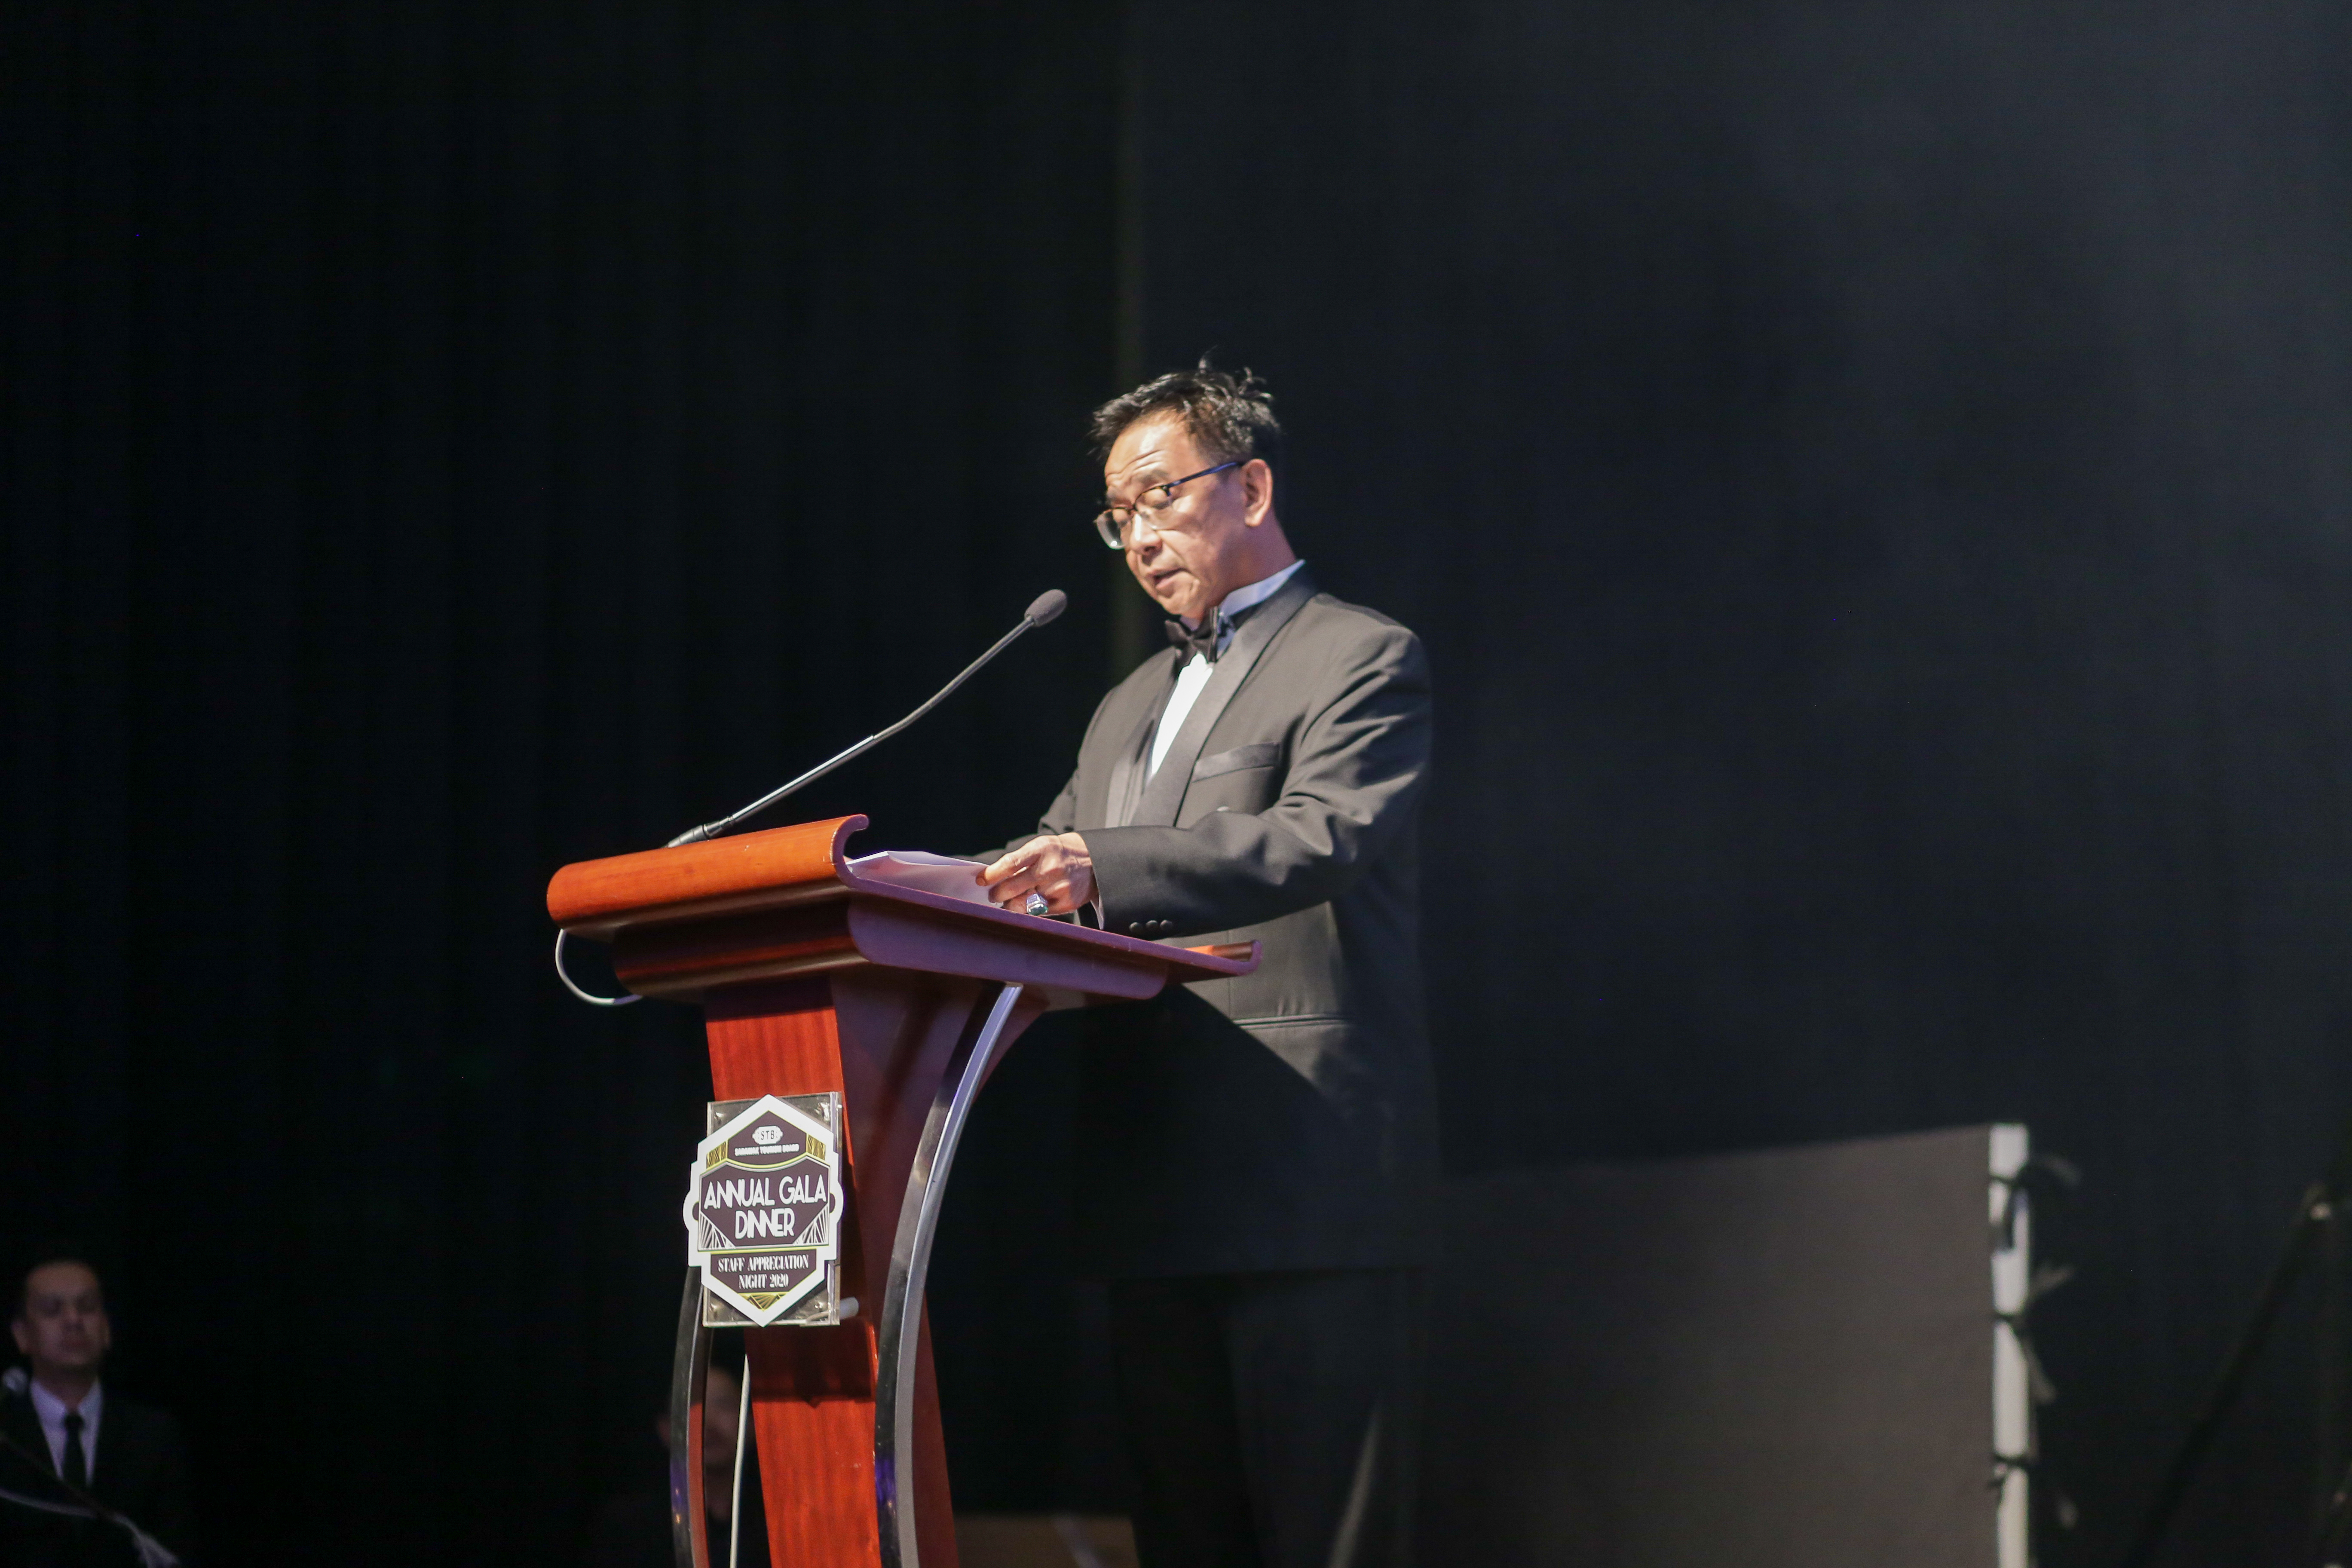 Photo shows the Minister of Tourism, Arts and Culture and Minister of Youth and Sports Sarawak, Datuk Haji Abdul Karim Rahman Hamzah presenting his speech during STB’s Annual Gala Dinner